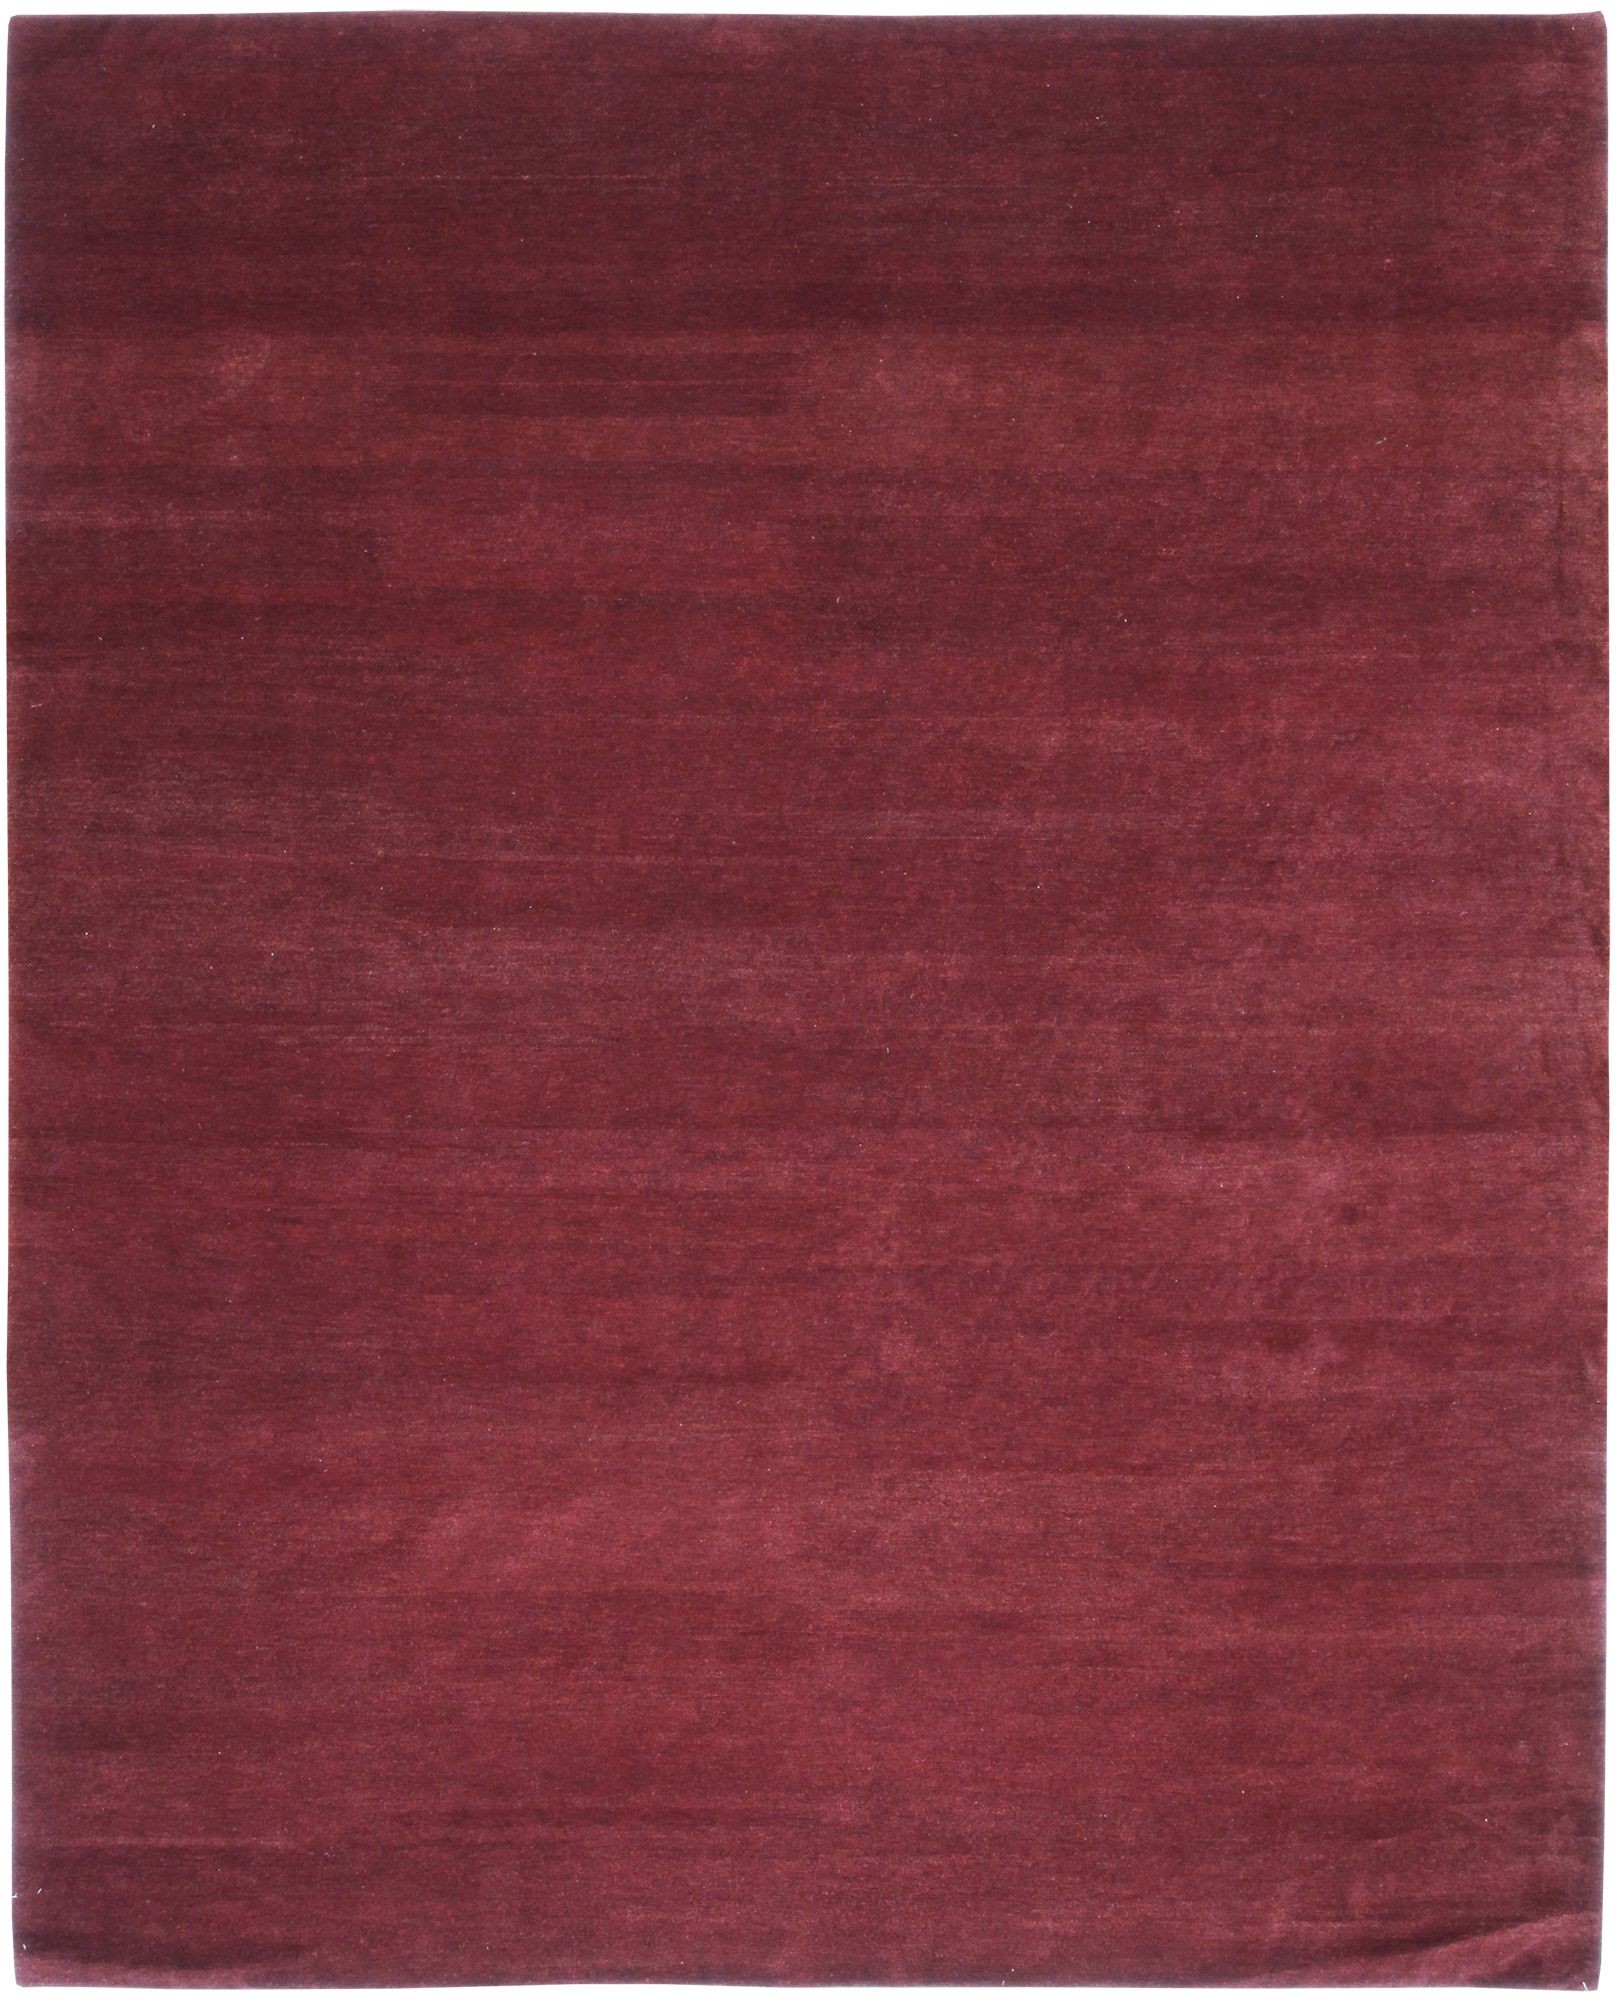 Solid Burgundy 9X12 Wool Area Rug | Turco Persian With Burgundy Rugs (View 3 of 15)